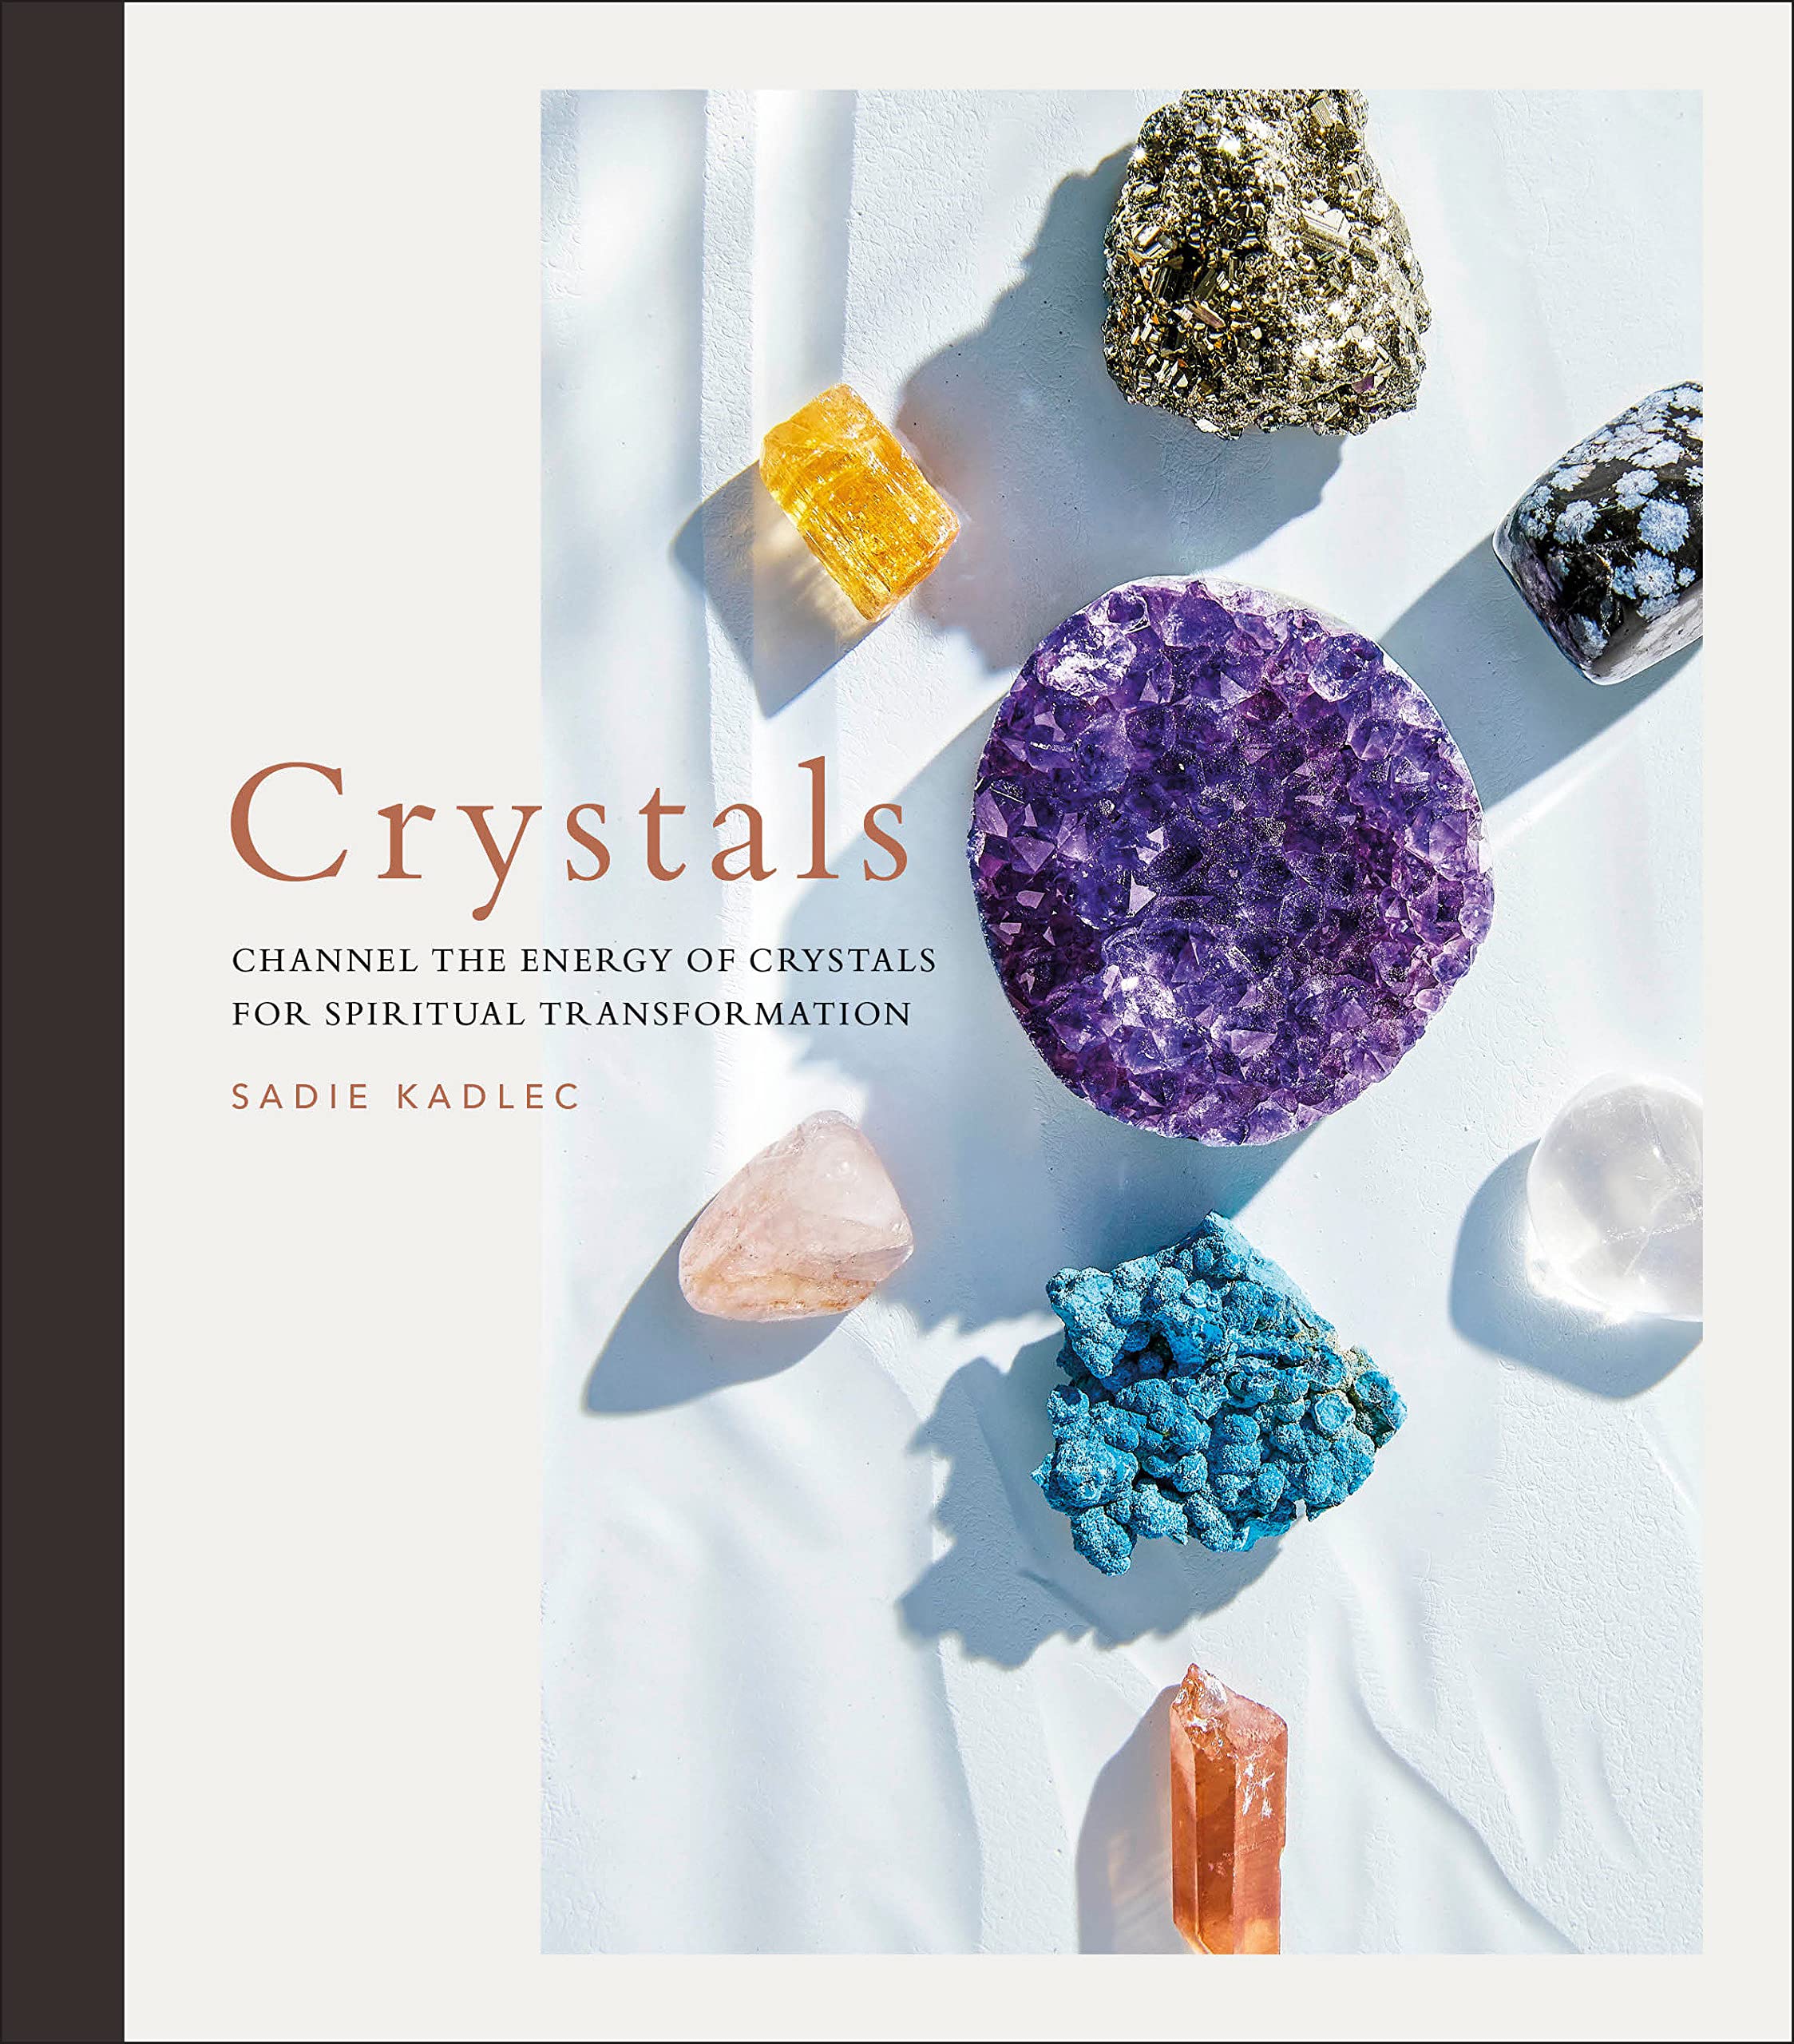 Crystals: Channel the Energy of Crystals for Spiritual Transformation by Sadie Kadlec